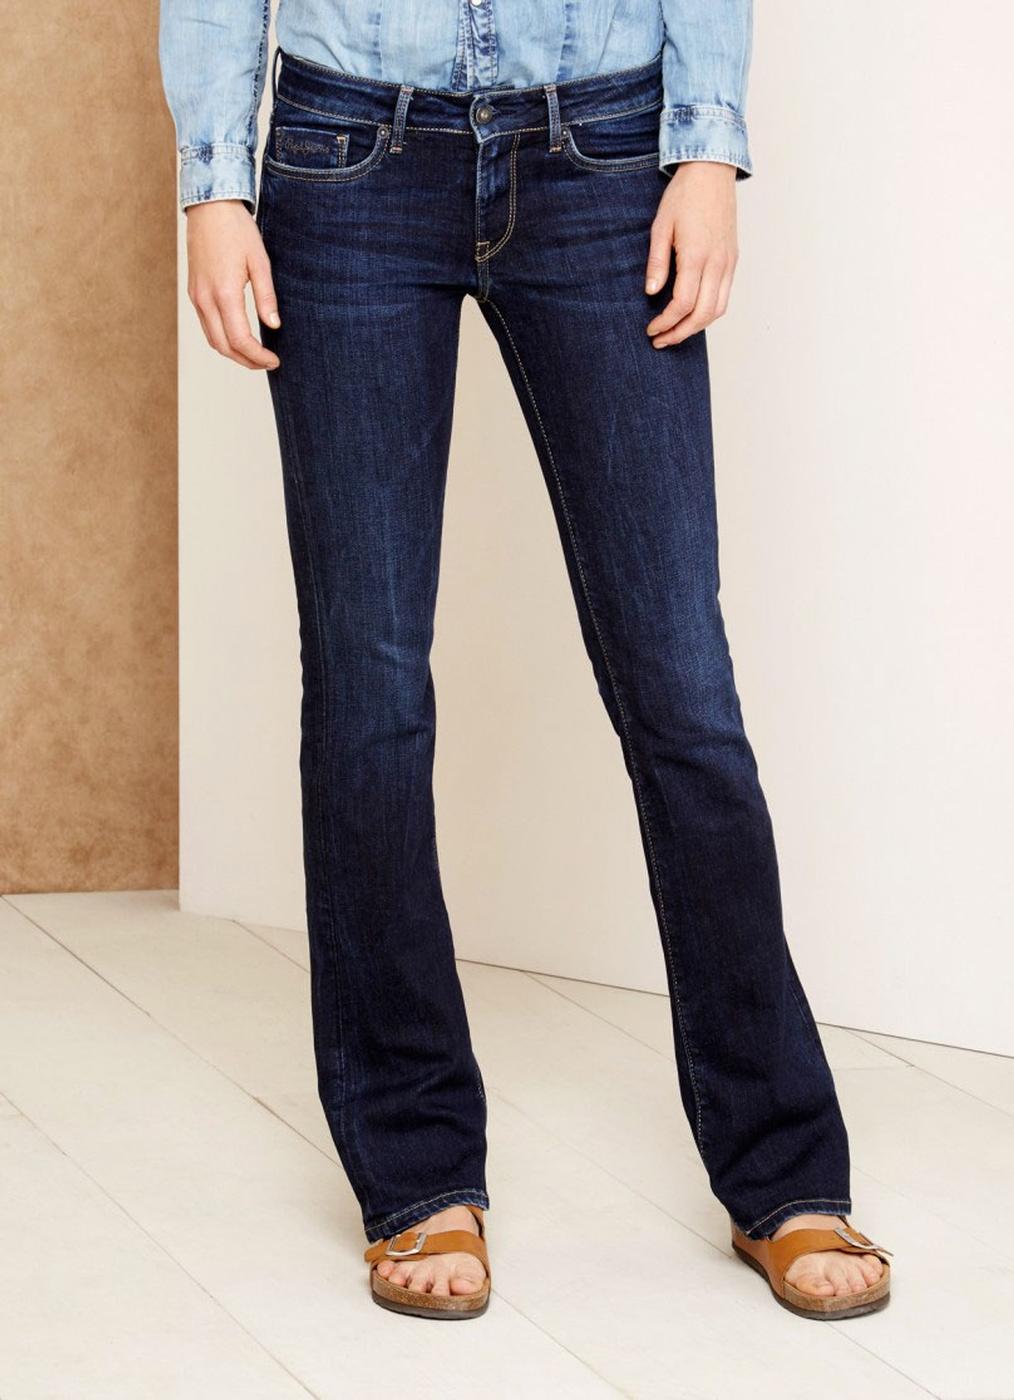 Piccadilly PEPE JEANS Retro 1960s Bootcut Jeans